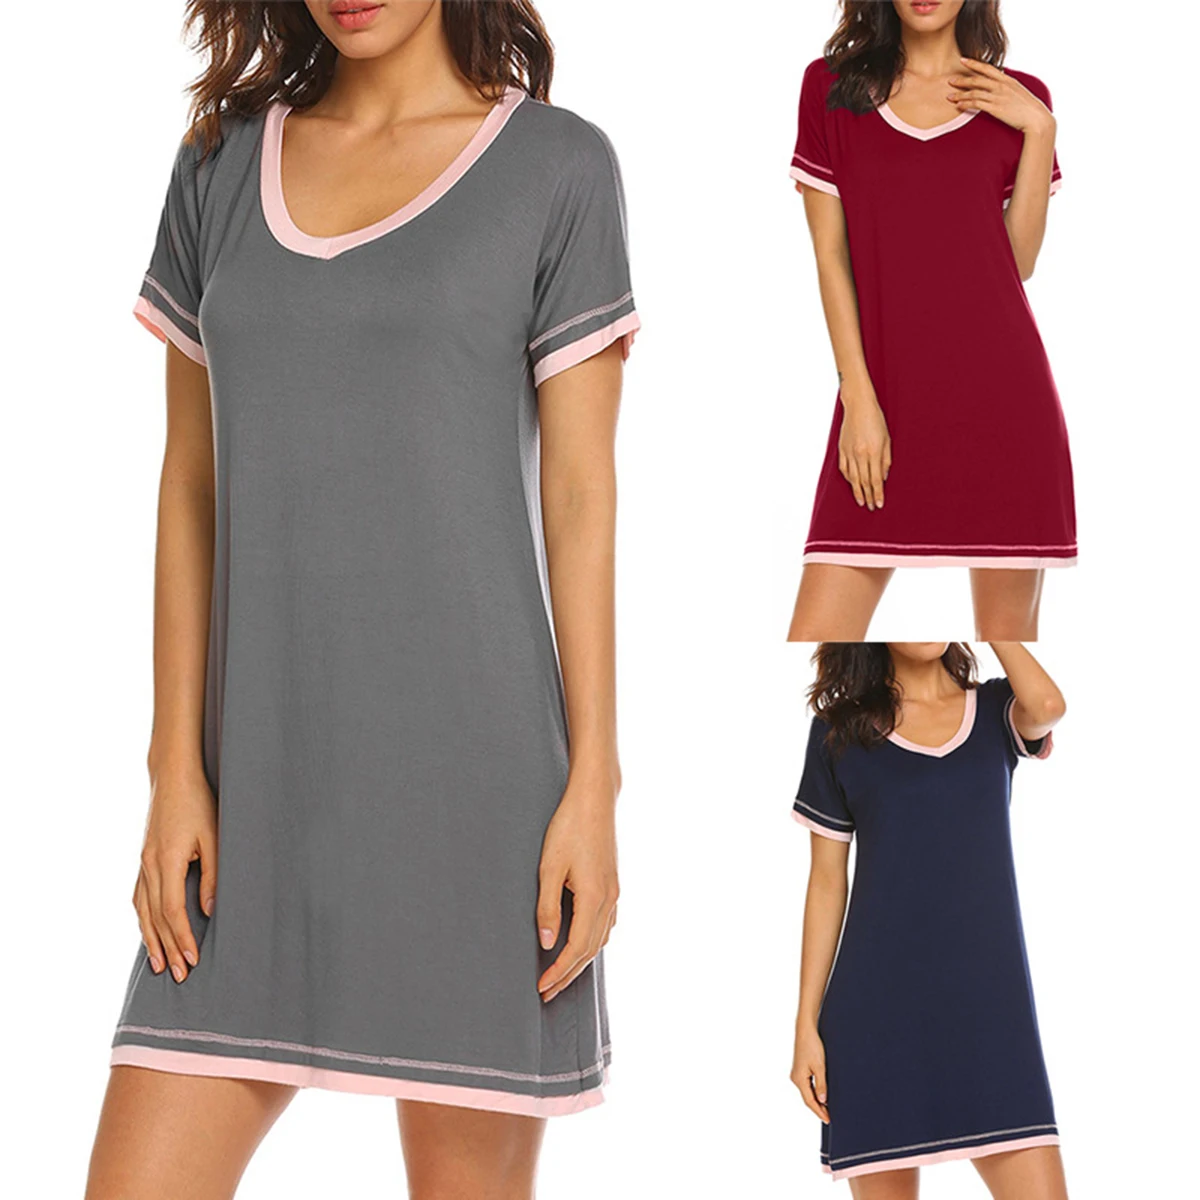 

Women's Short Sleeve Casual Nightdress Midi Dress Nightgowns Summer Wild Dress Casual Home Service Solid Color Sleepshirts